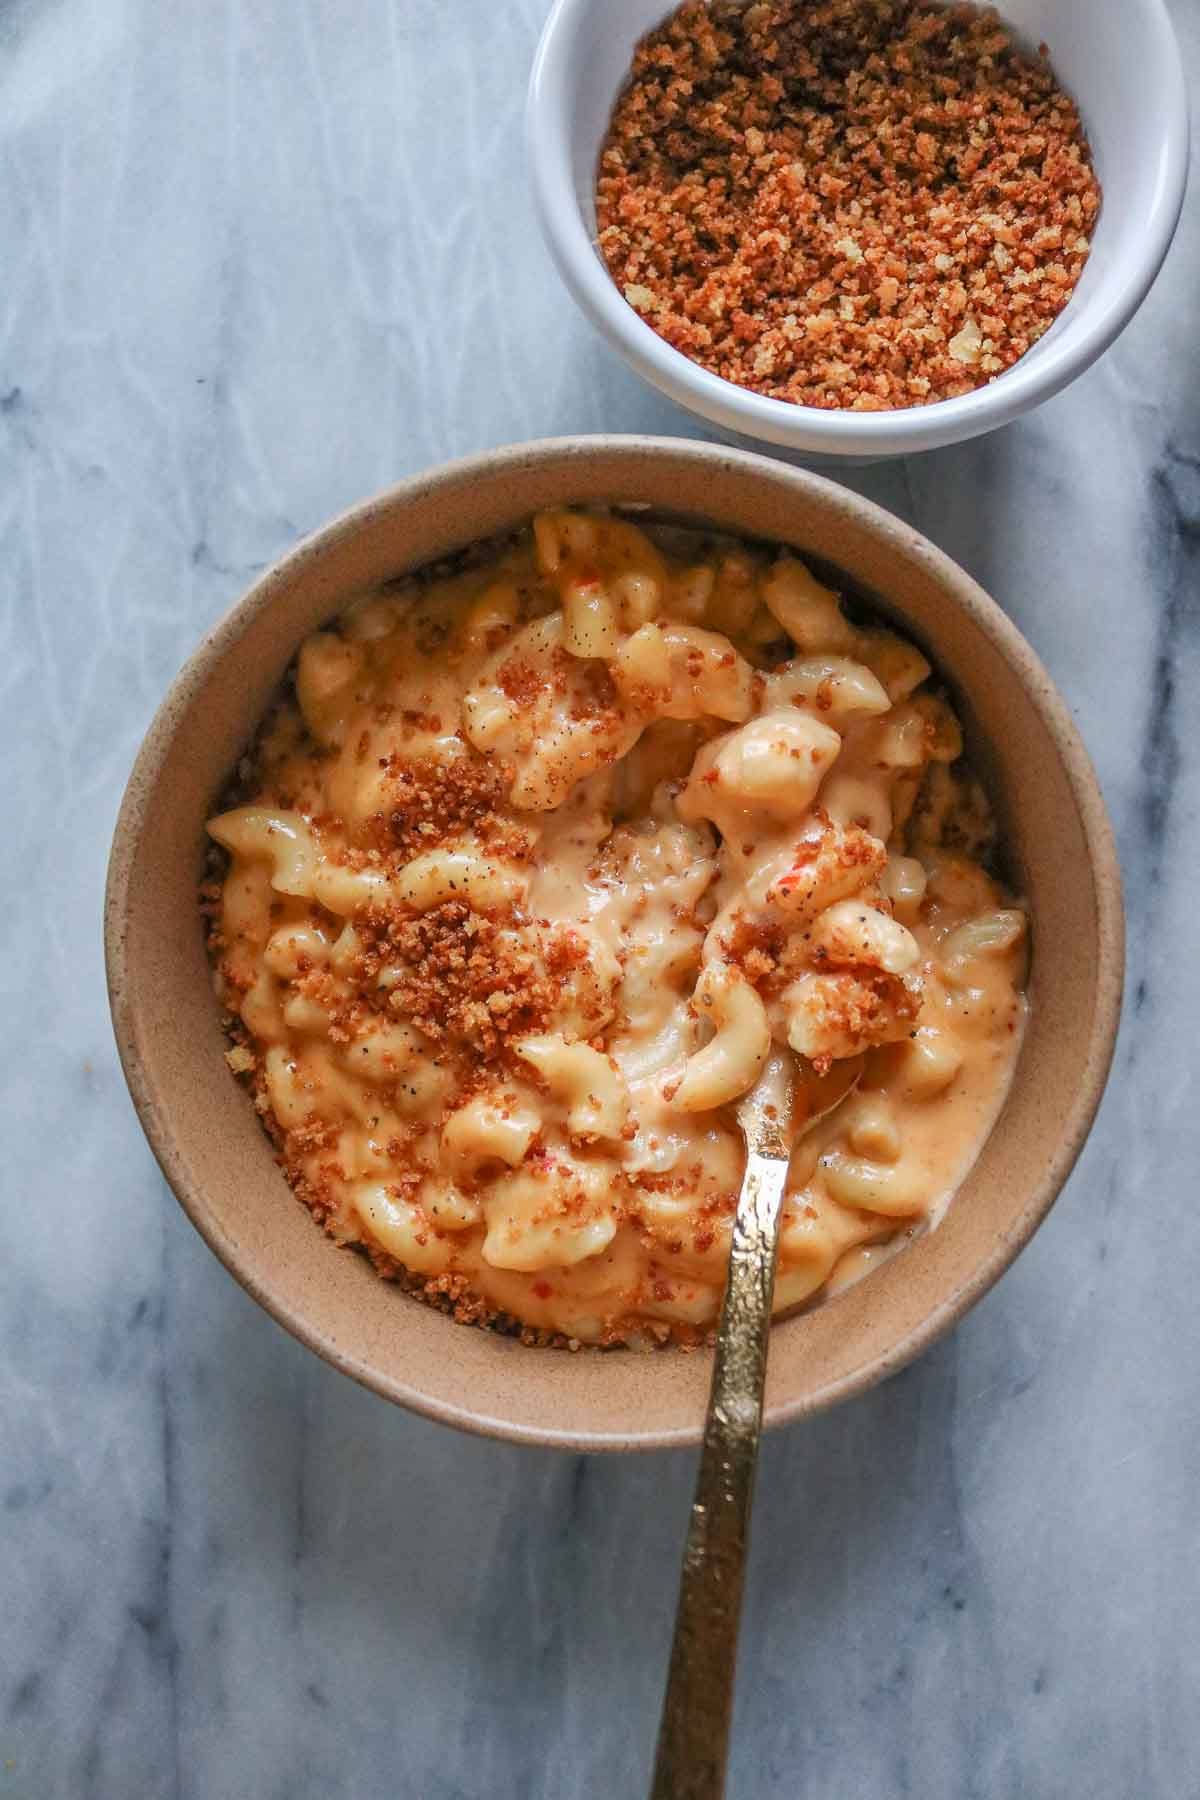 Bowl of mac and cheese with golden brown and crunchy panko bread crumbs.